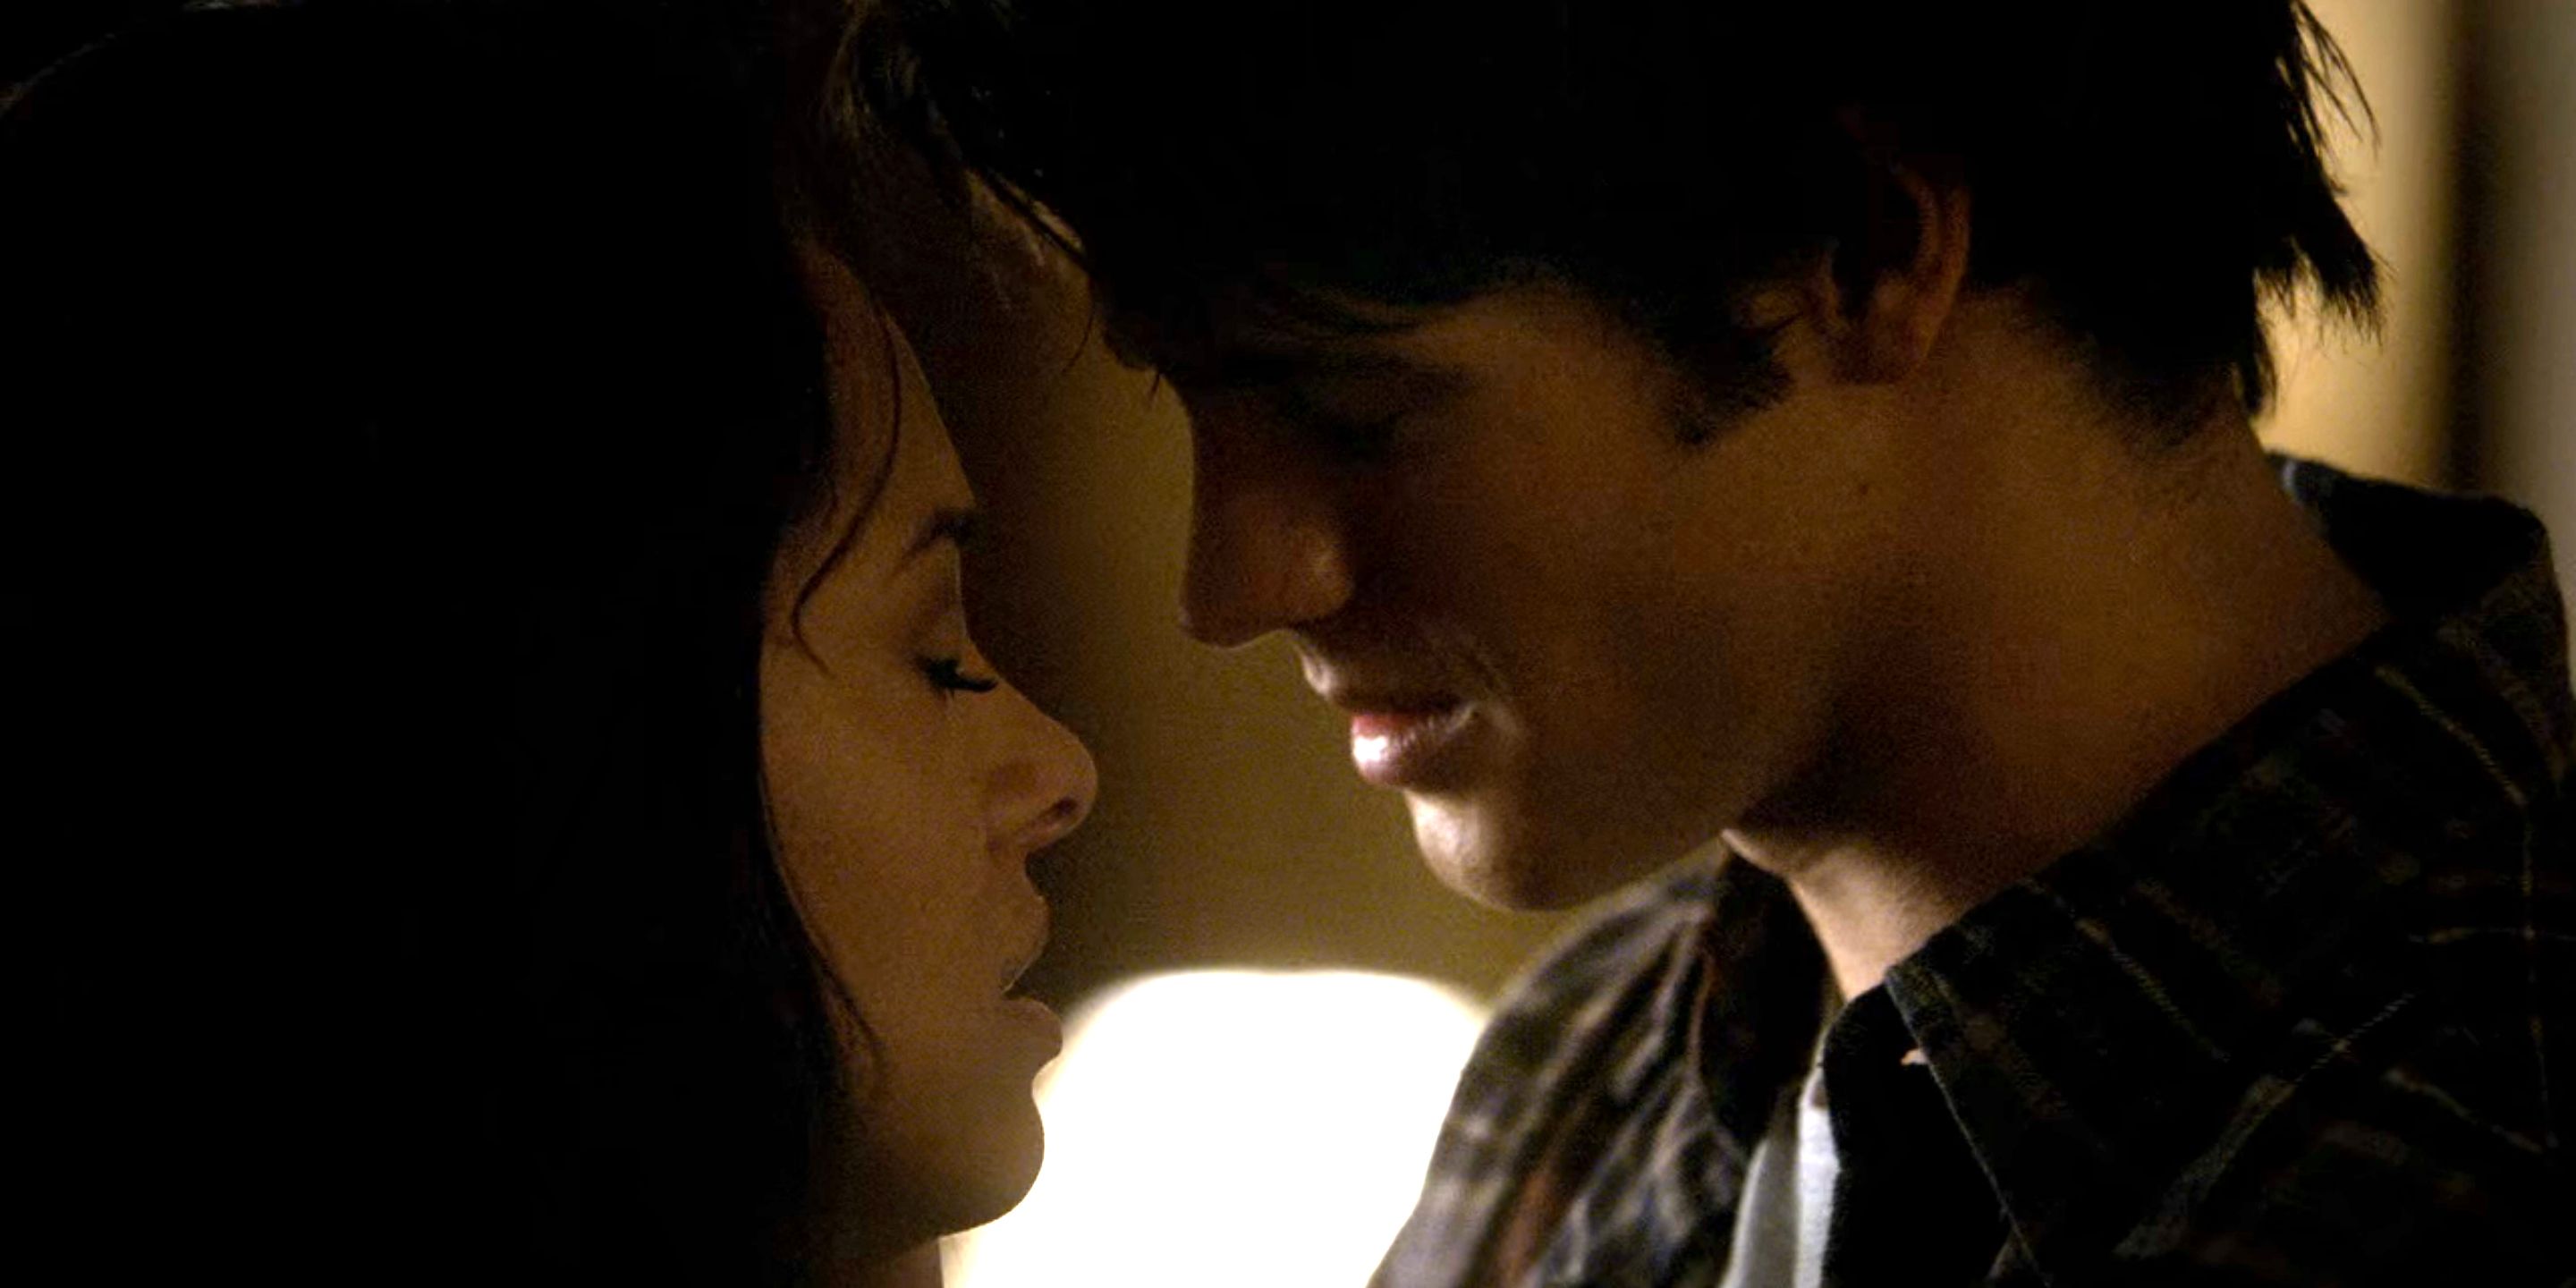 Bonnie and Jeremy almost kiss in The Vampire Diaries.